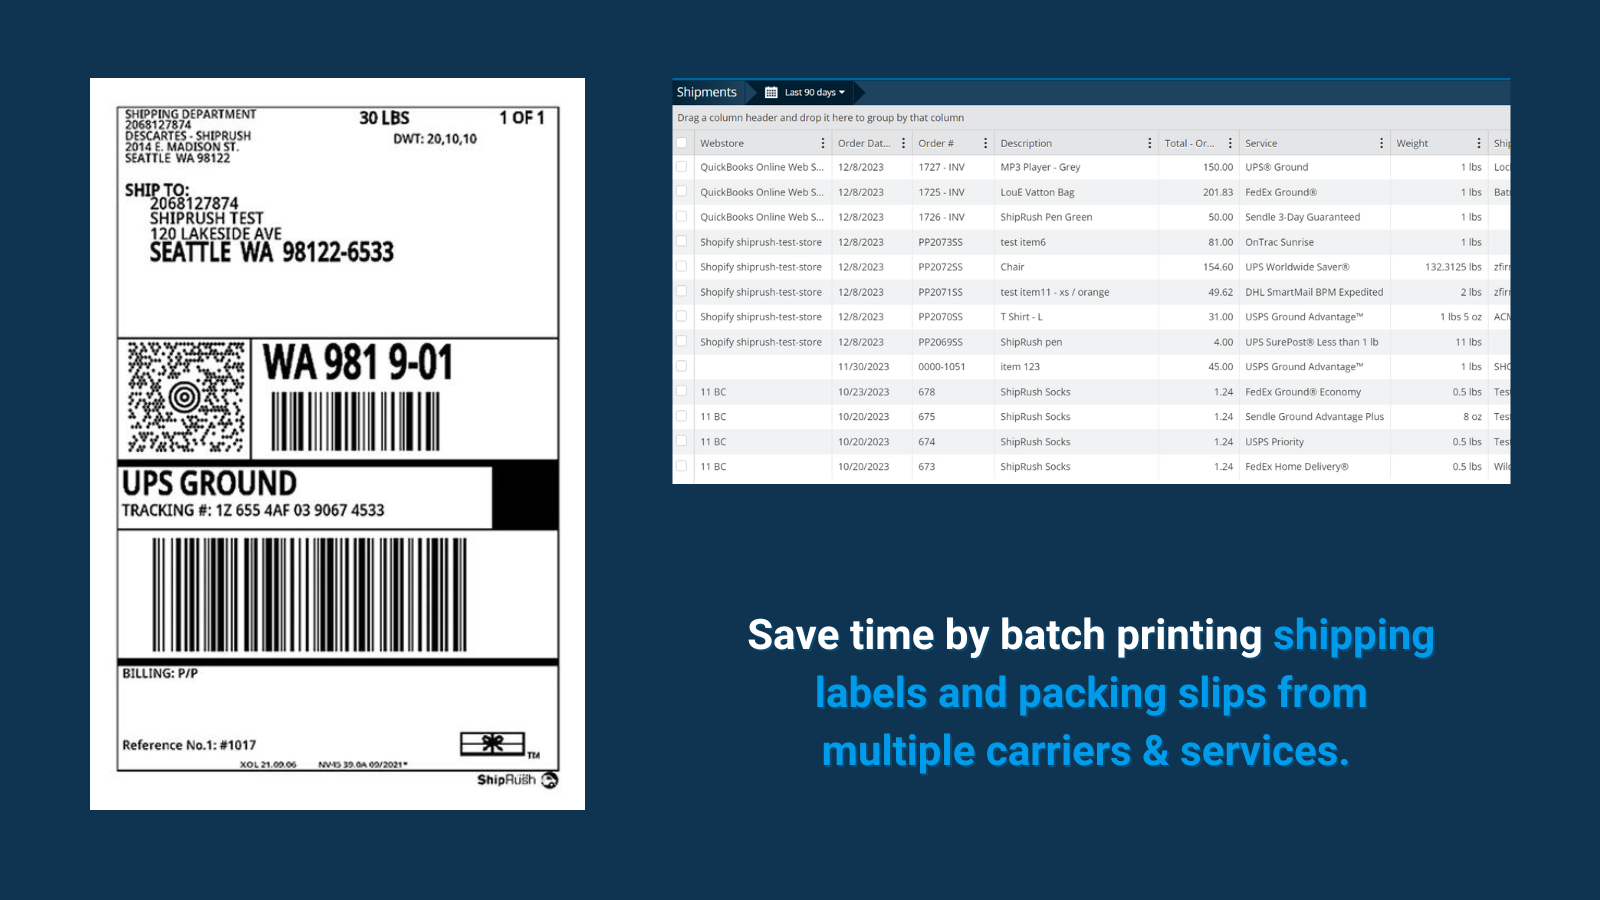 Batch printing can save time printing labels and packing slips from multiple carriers and services.